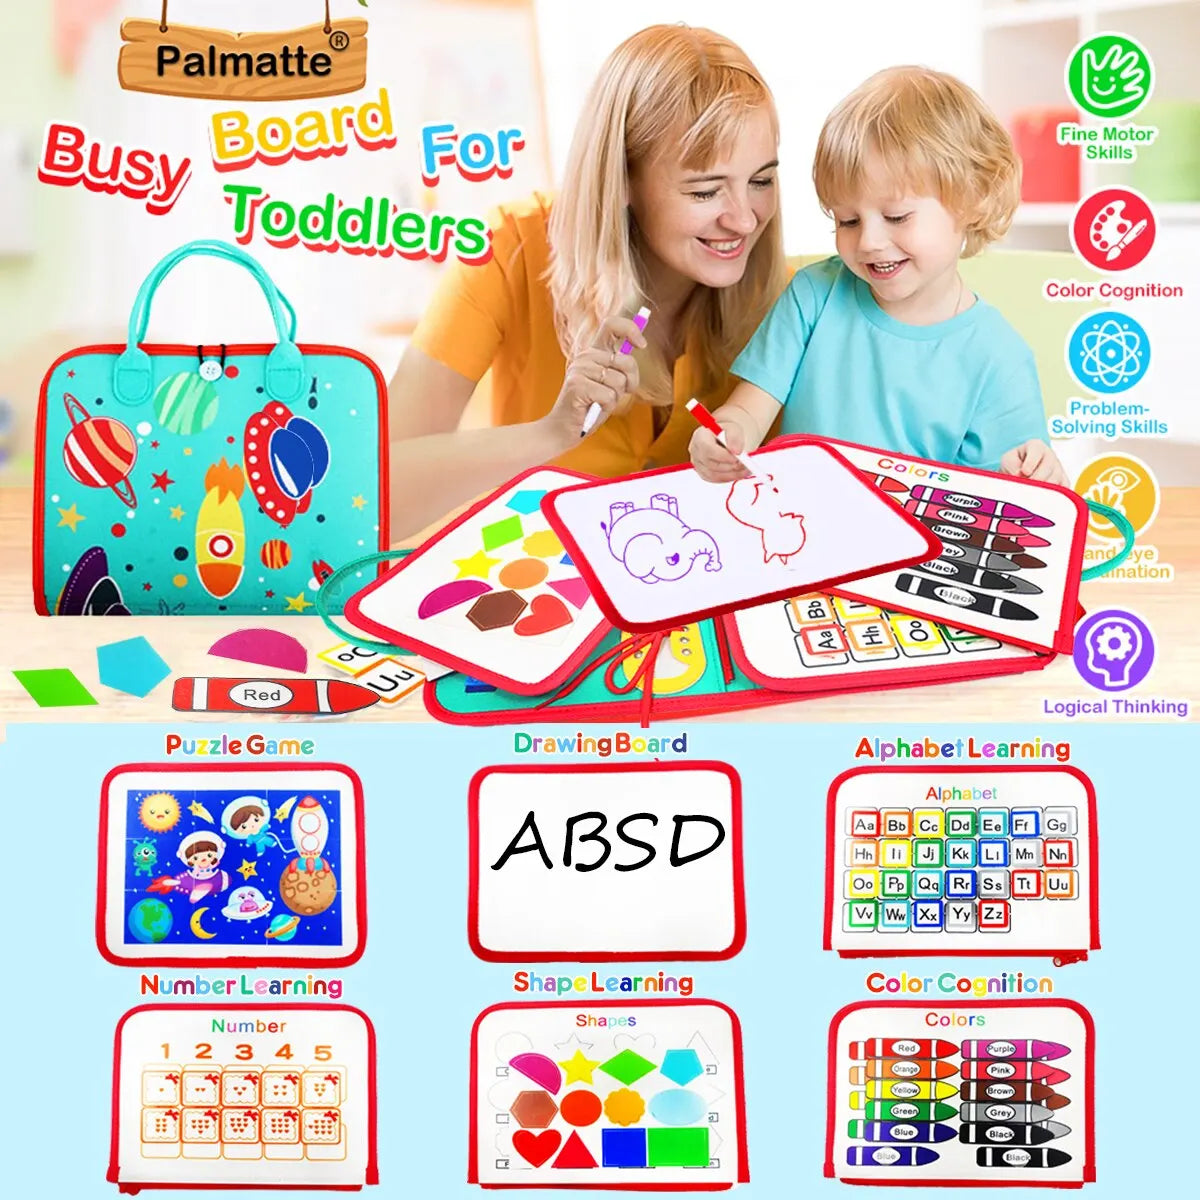 Busy Board Toddlers Sensory Toy